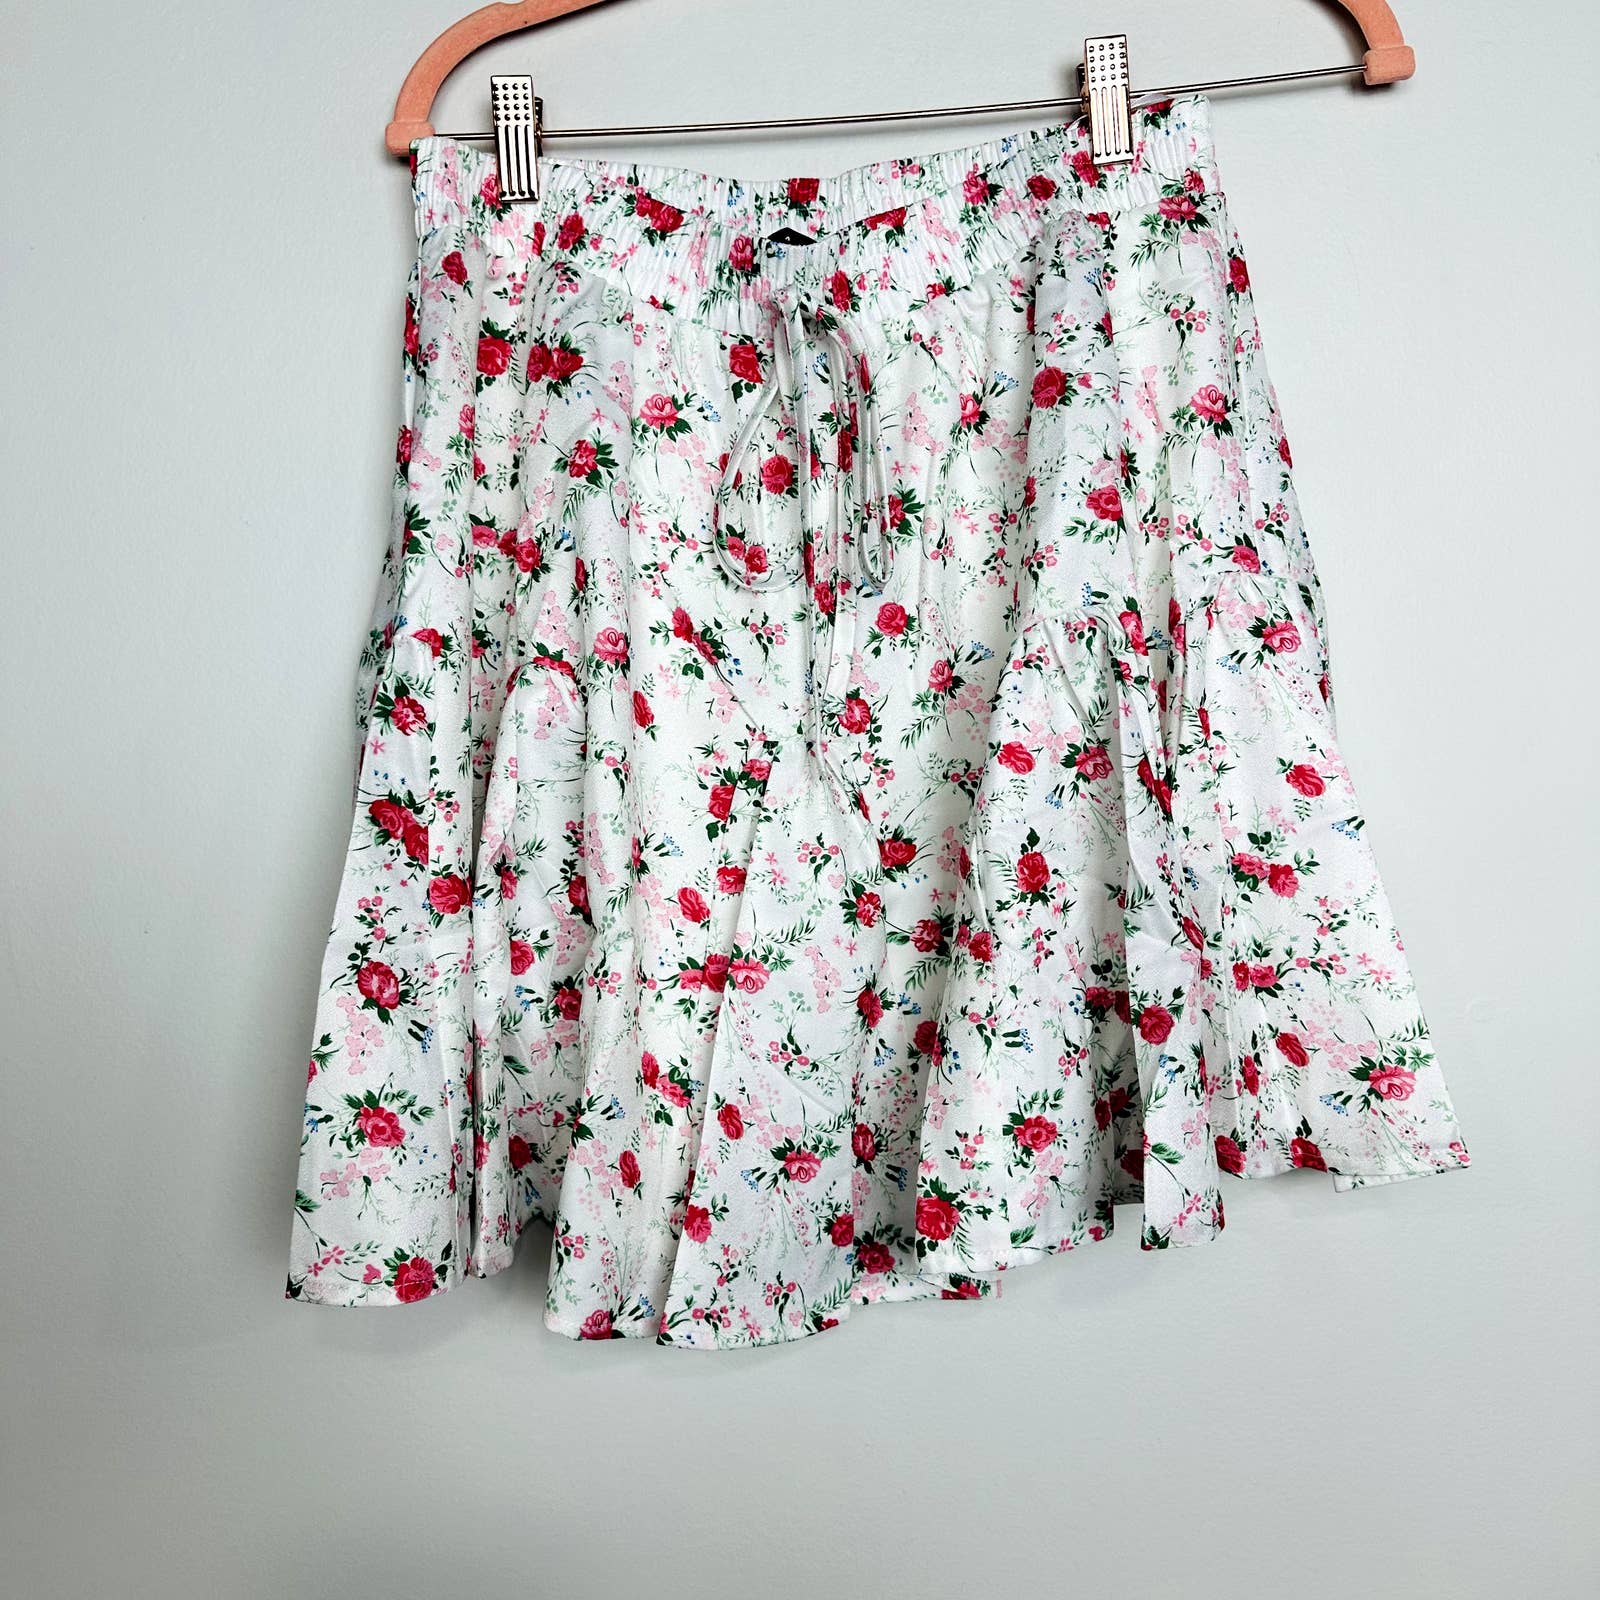 Lulus NWT Cute Factor Floral Print Tiered Woven A-Line Mini Skirt White